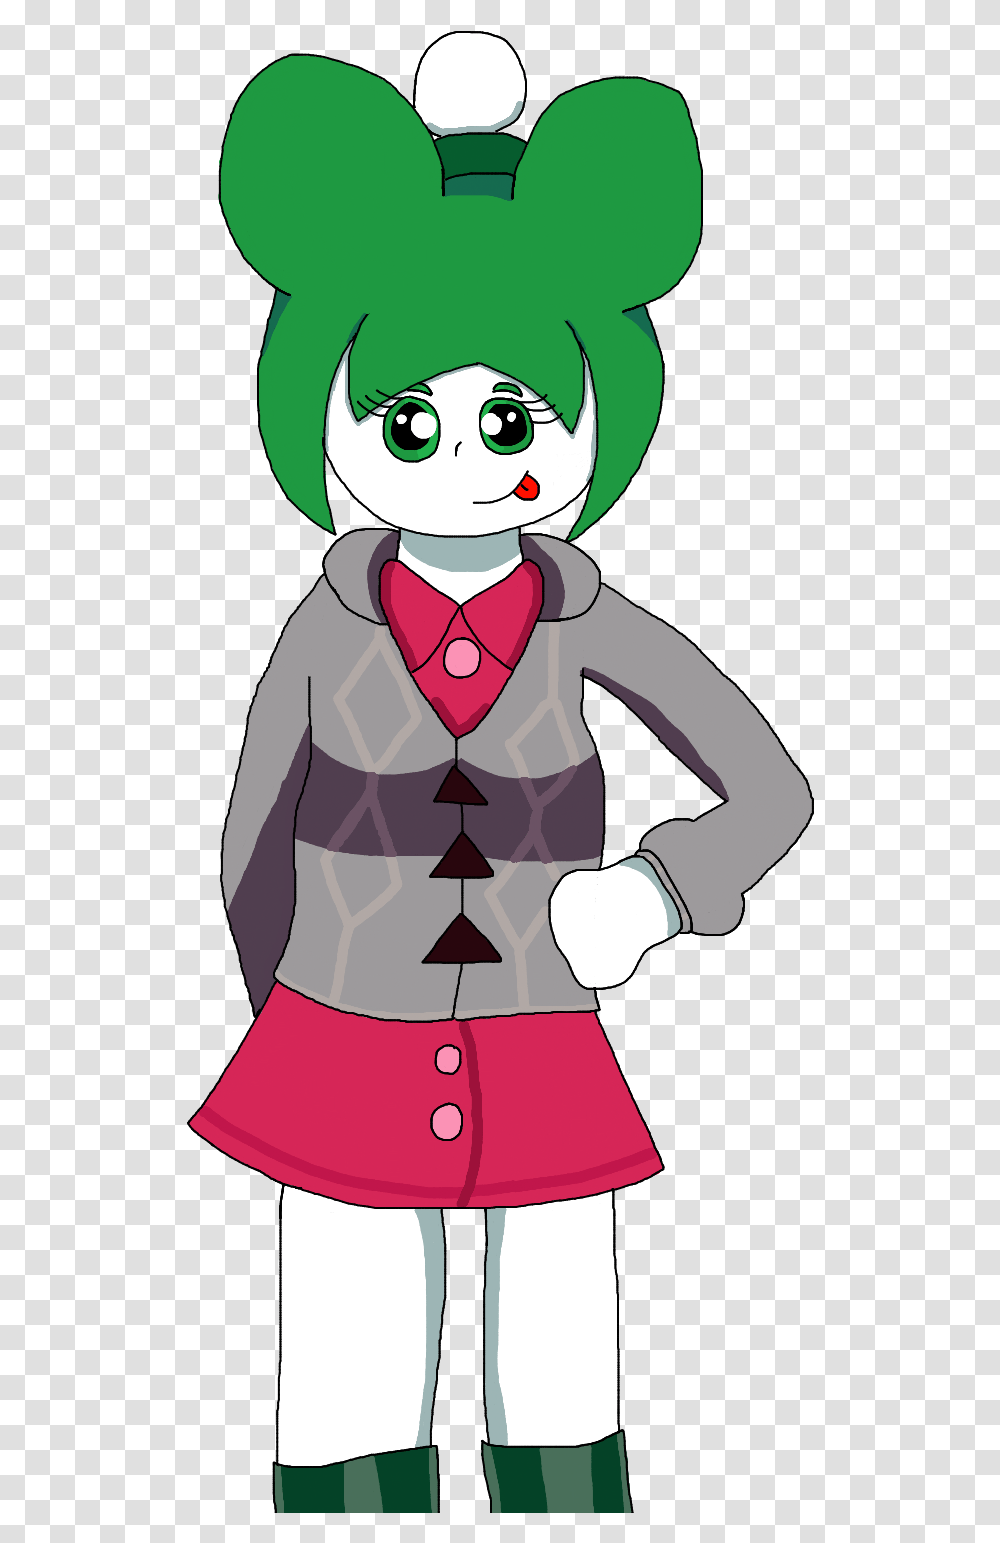 Mello In The Female Pc From Pokemon Sword And Shield Pokemon Trainer Sword Shield, Person, Human, Clothing, Apparel Transparent Png